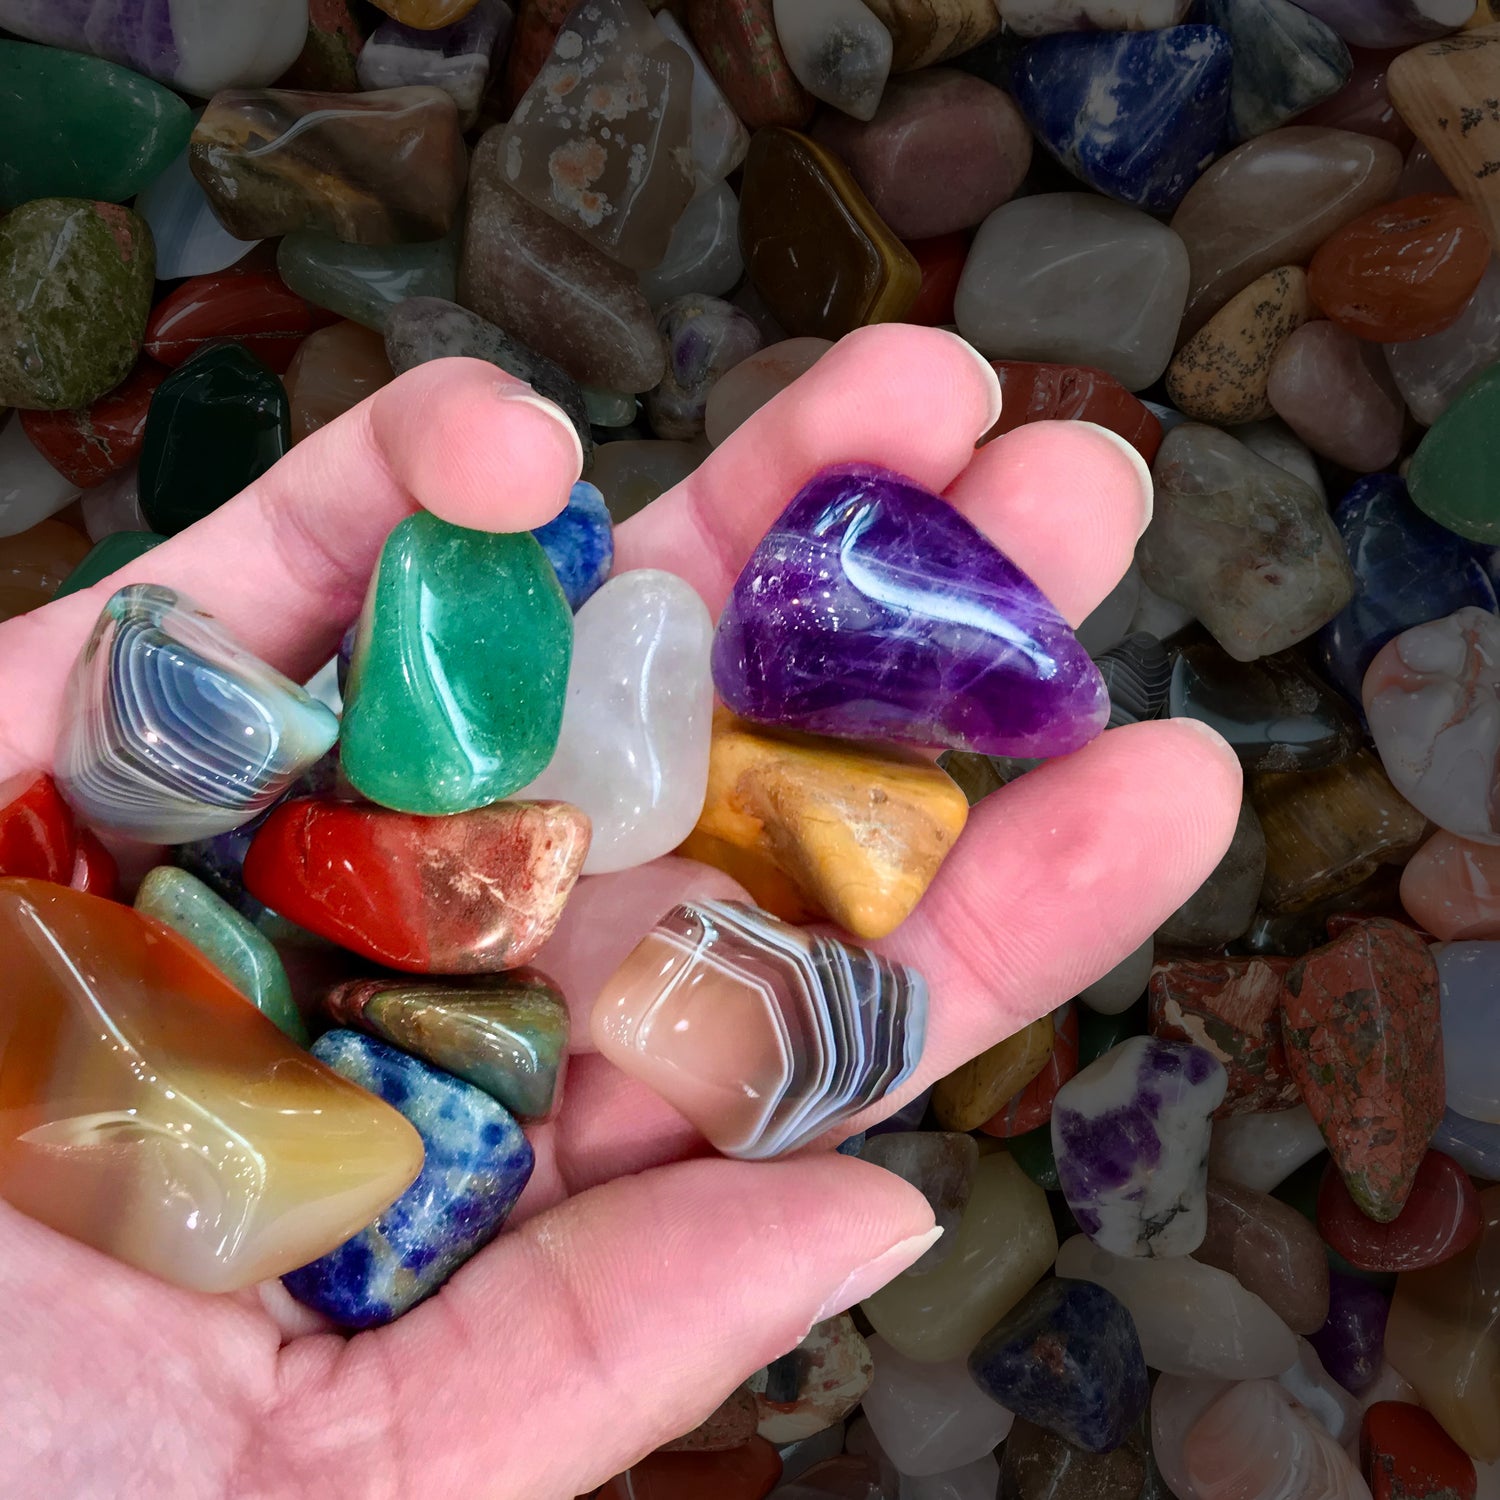 Large tumble polished stones are being held in a person's hand.  Varieties seen include amethyst, agates, aventurine, and sodalite.